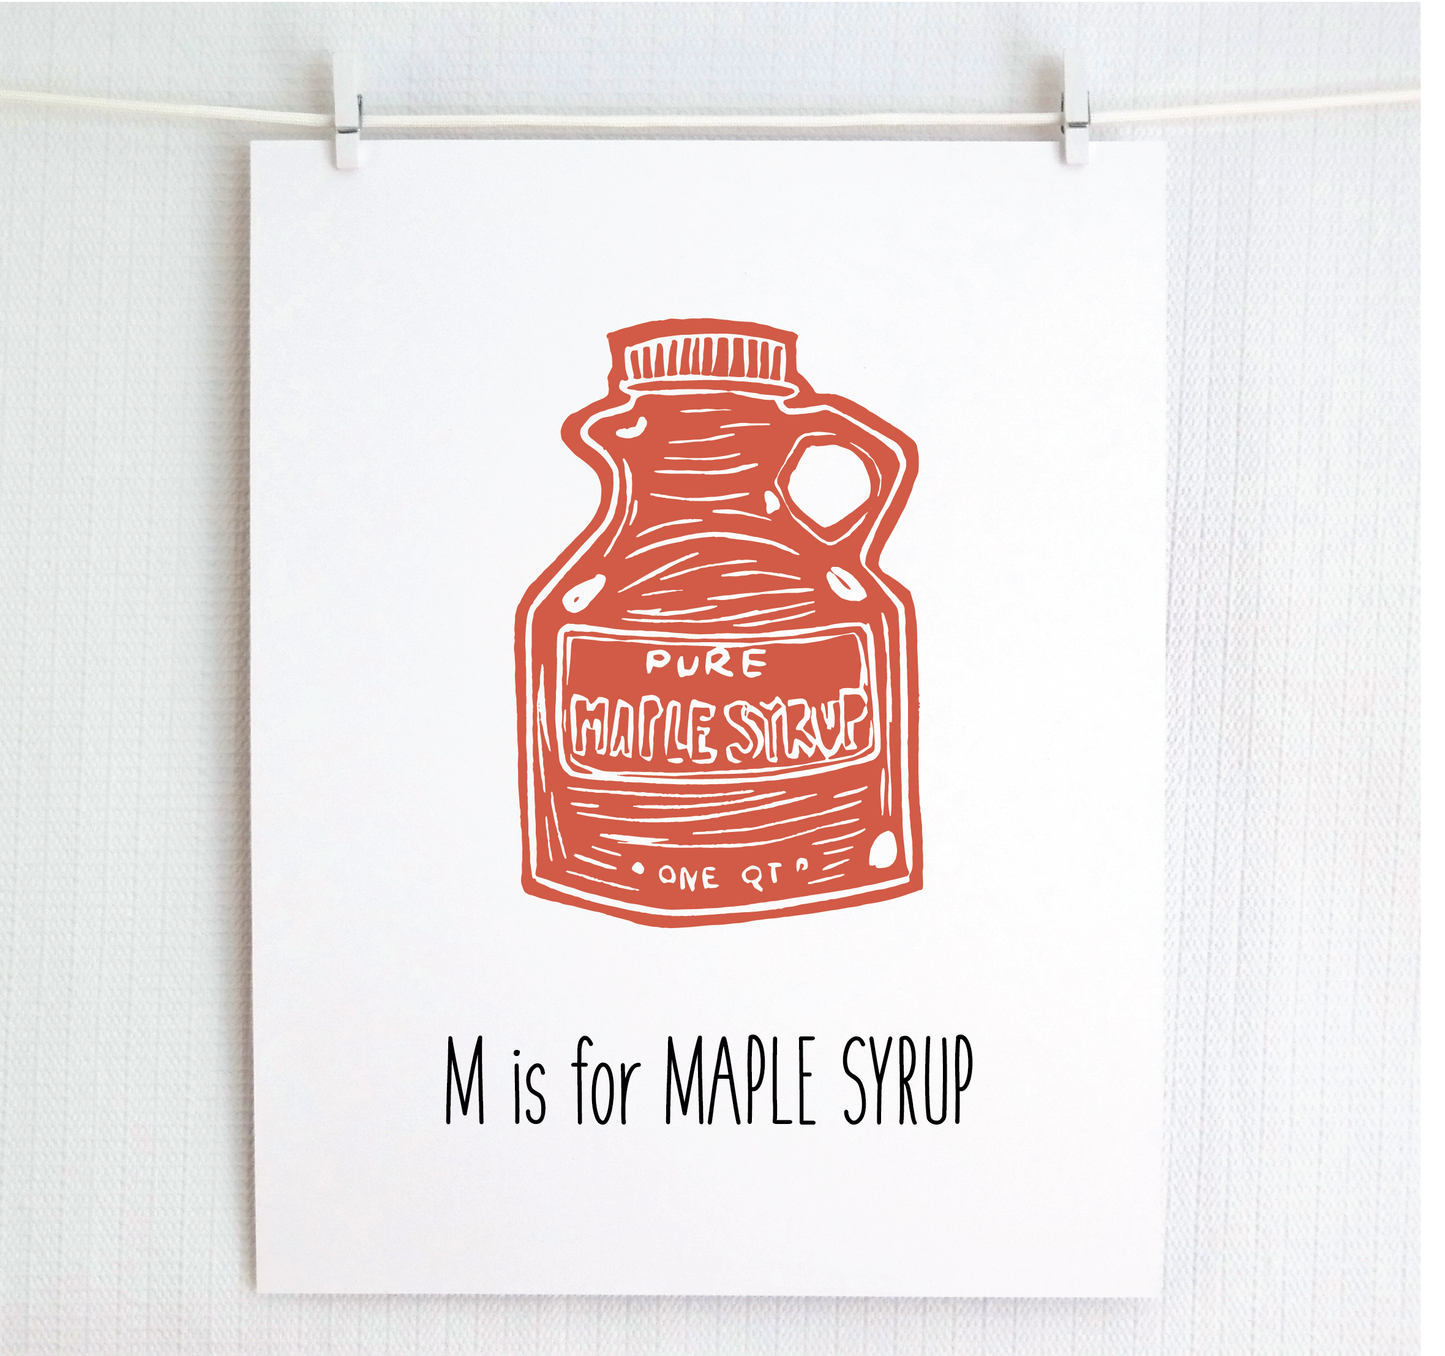 M is for Maple Syrup